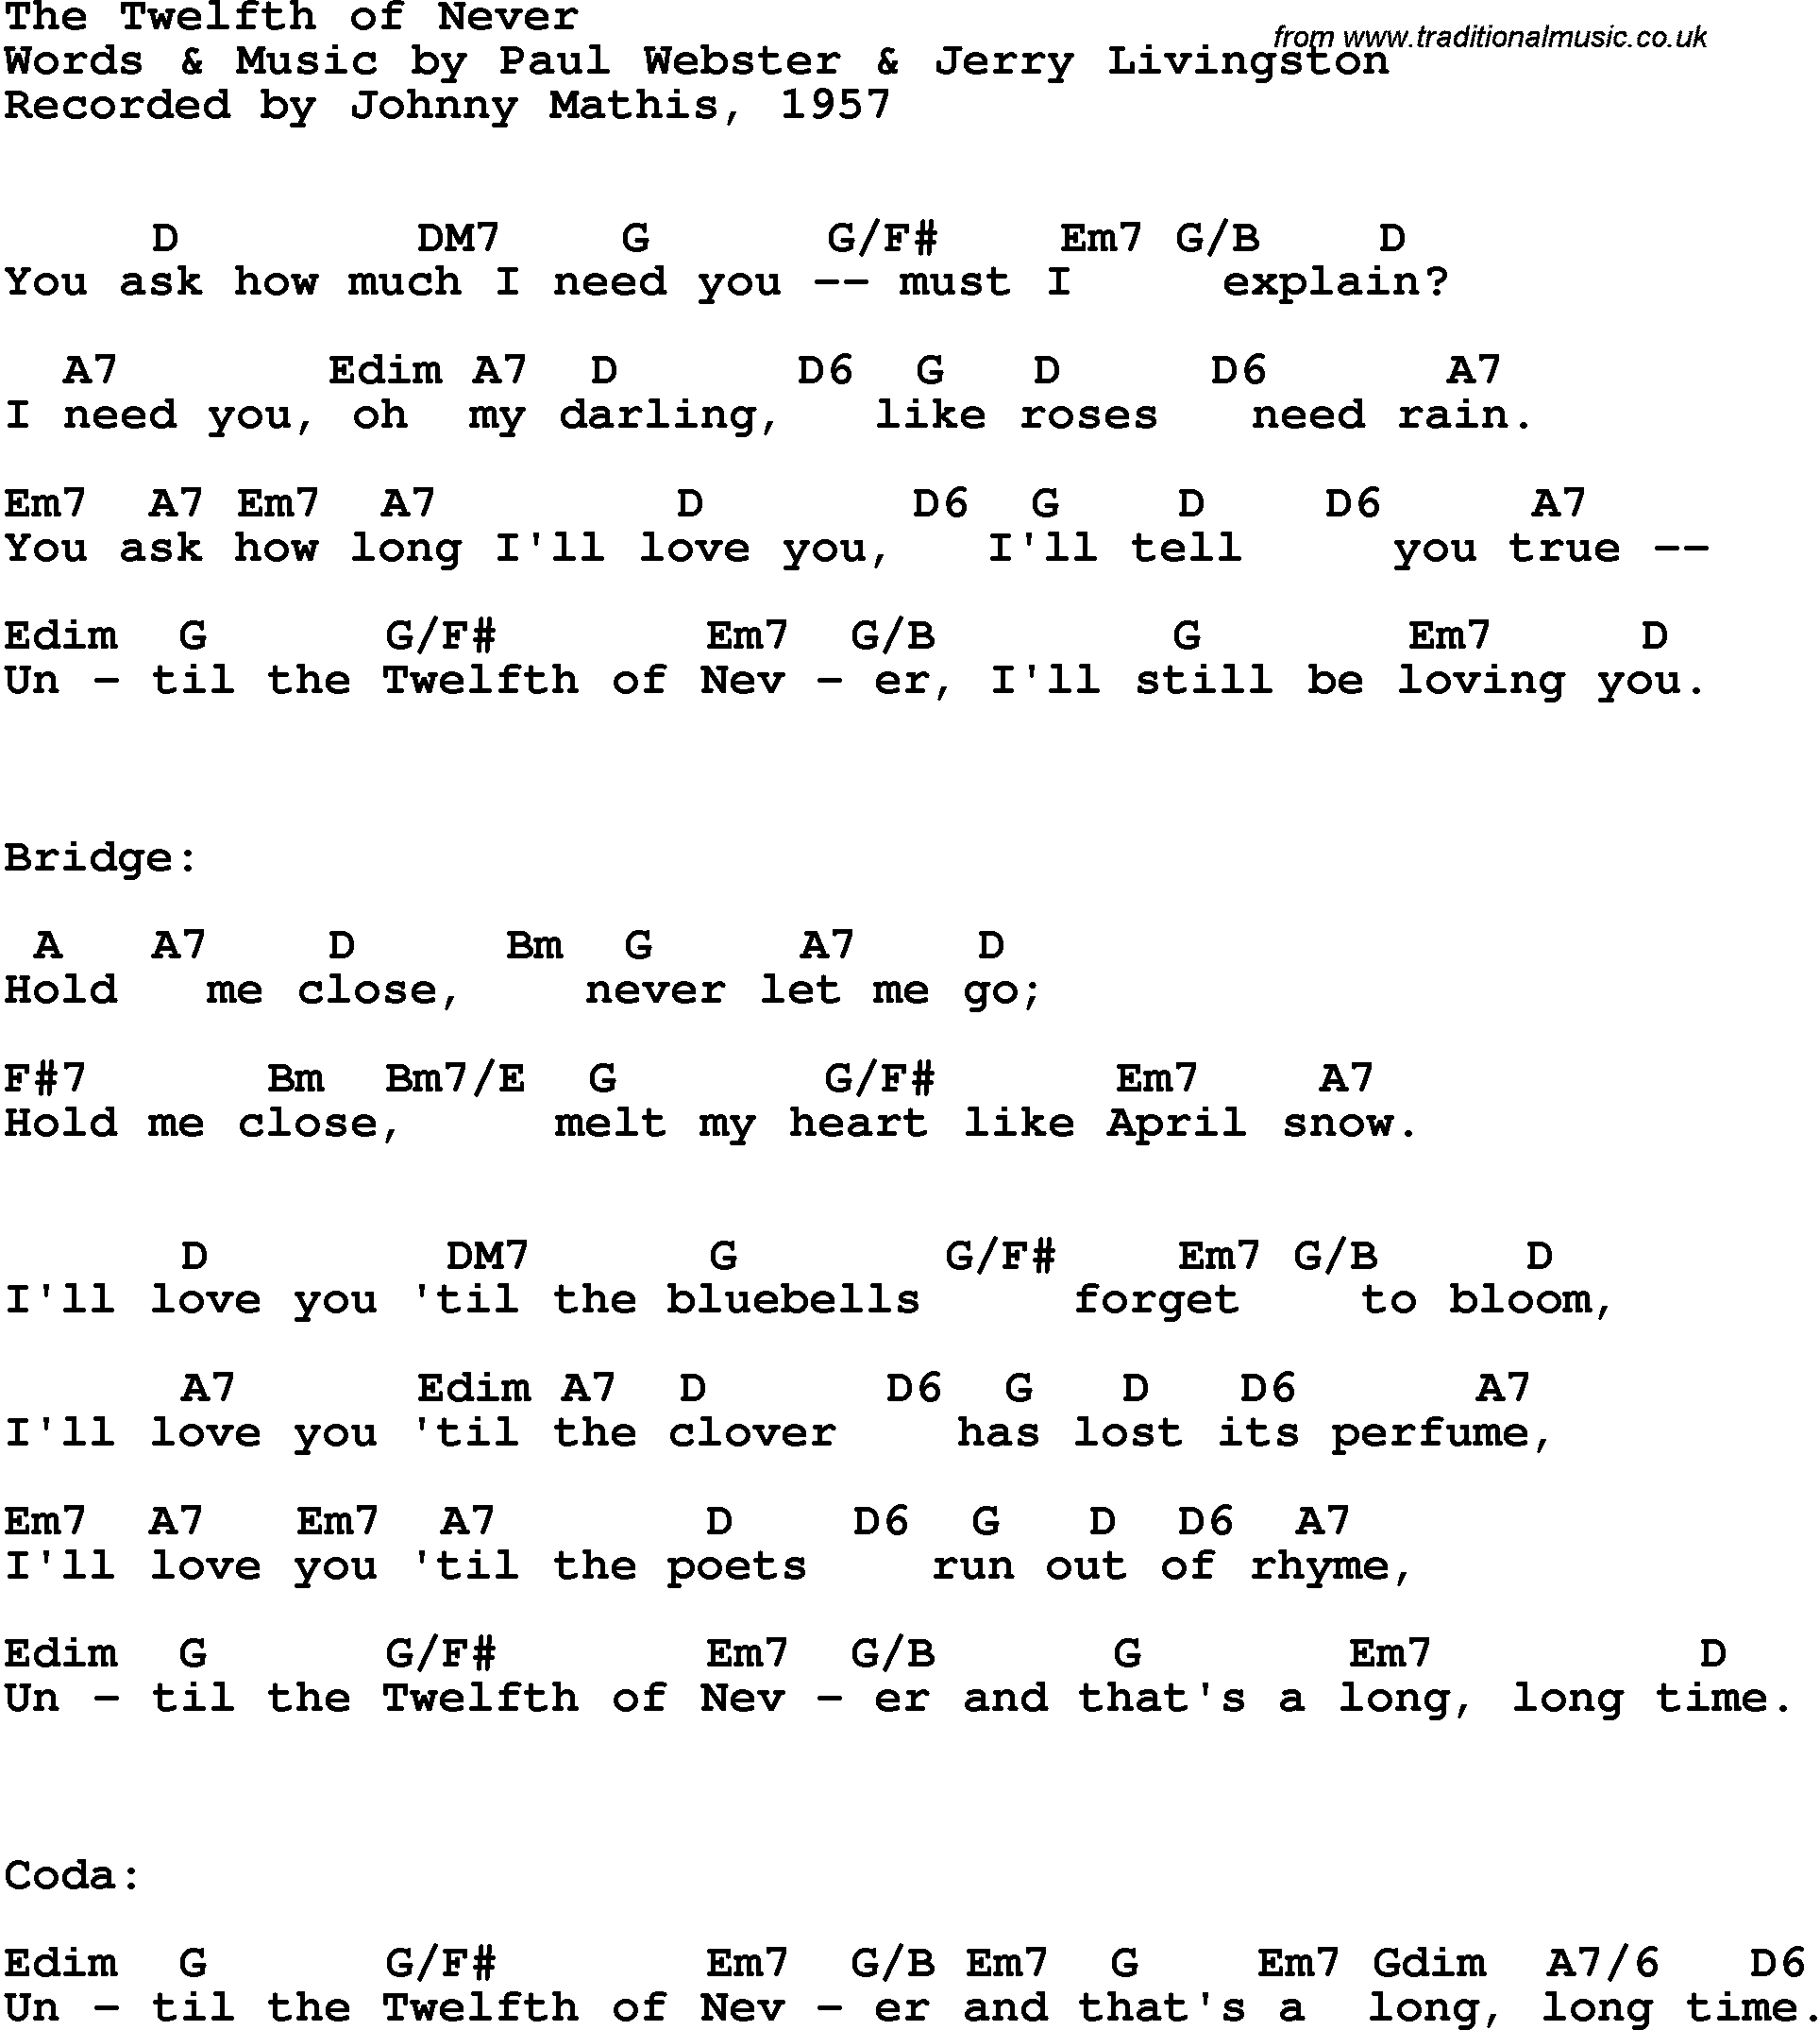 Song Lyrics with guitar chords for Twelfth Of Never, The - Johnny Mathis, 1957